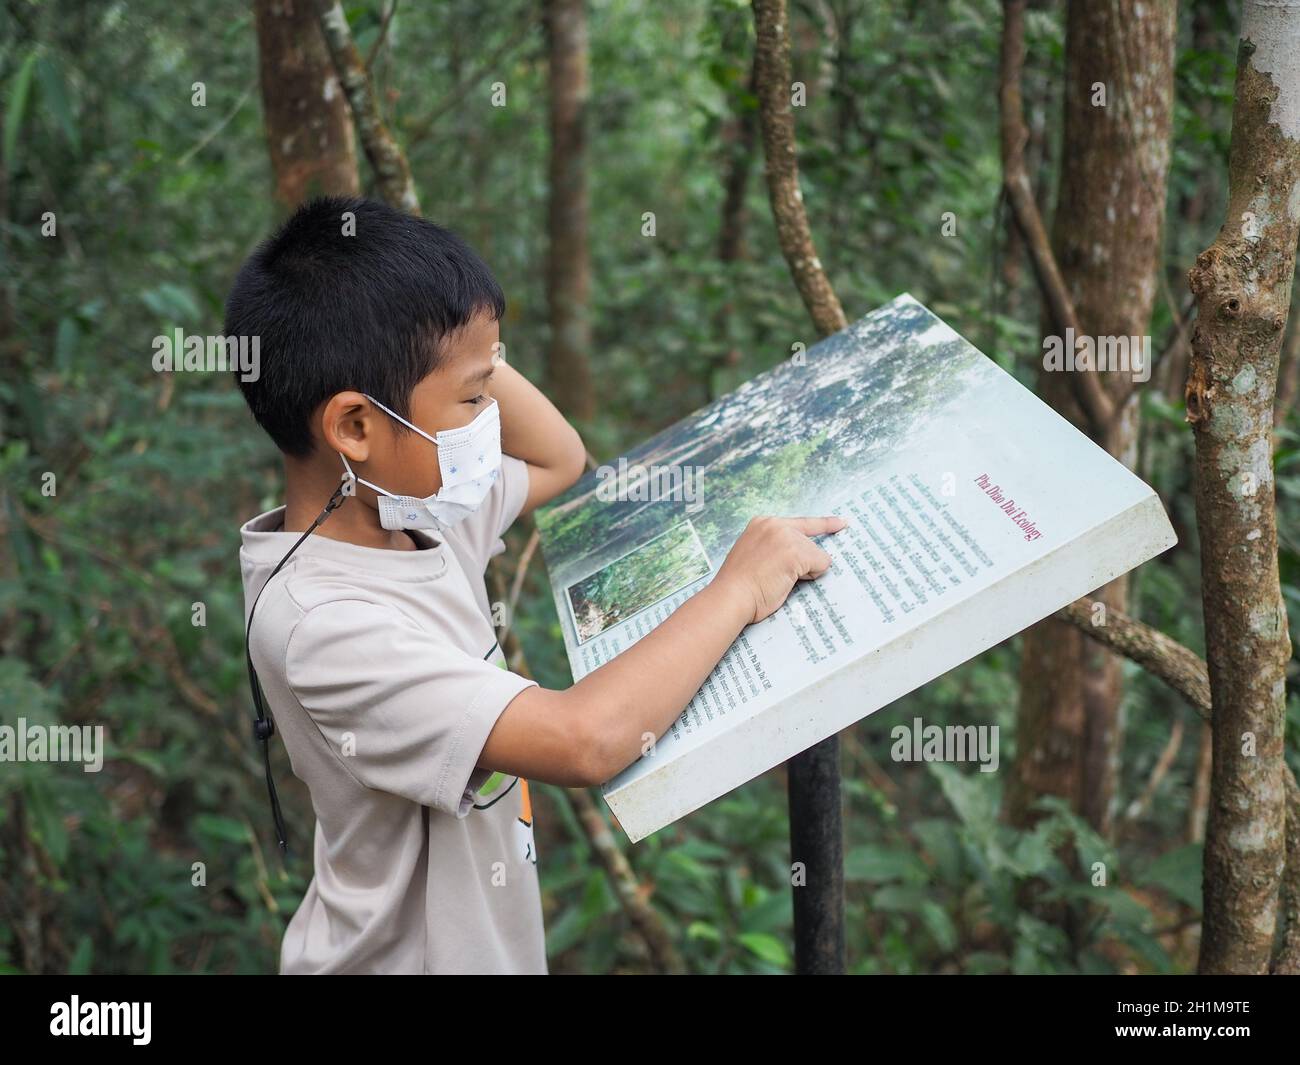 A boy standing and reading a tourist attraction In the national park Stock Photo